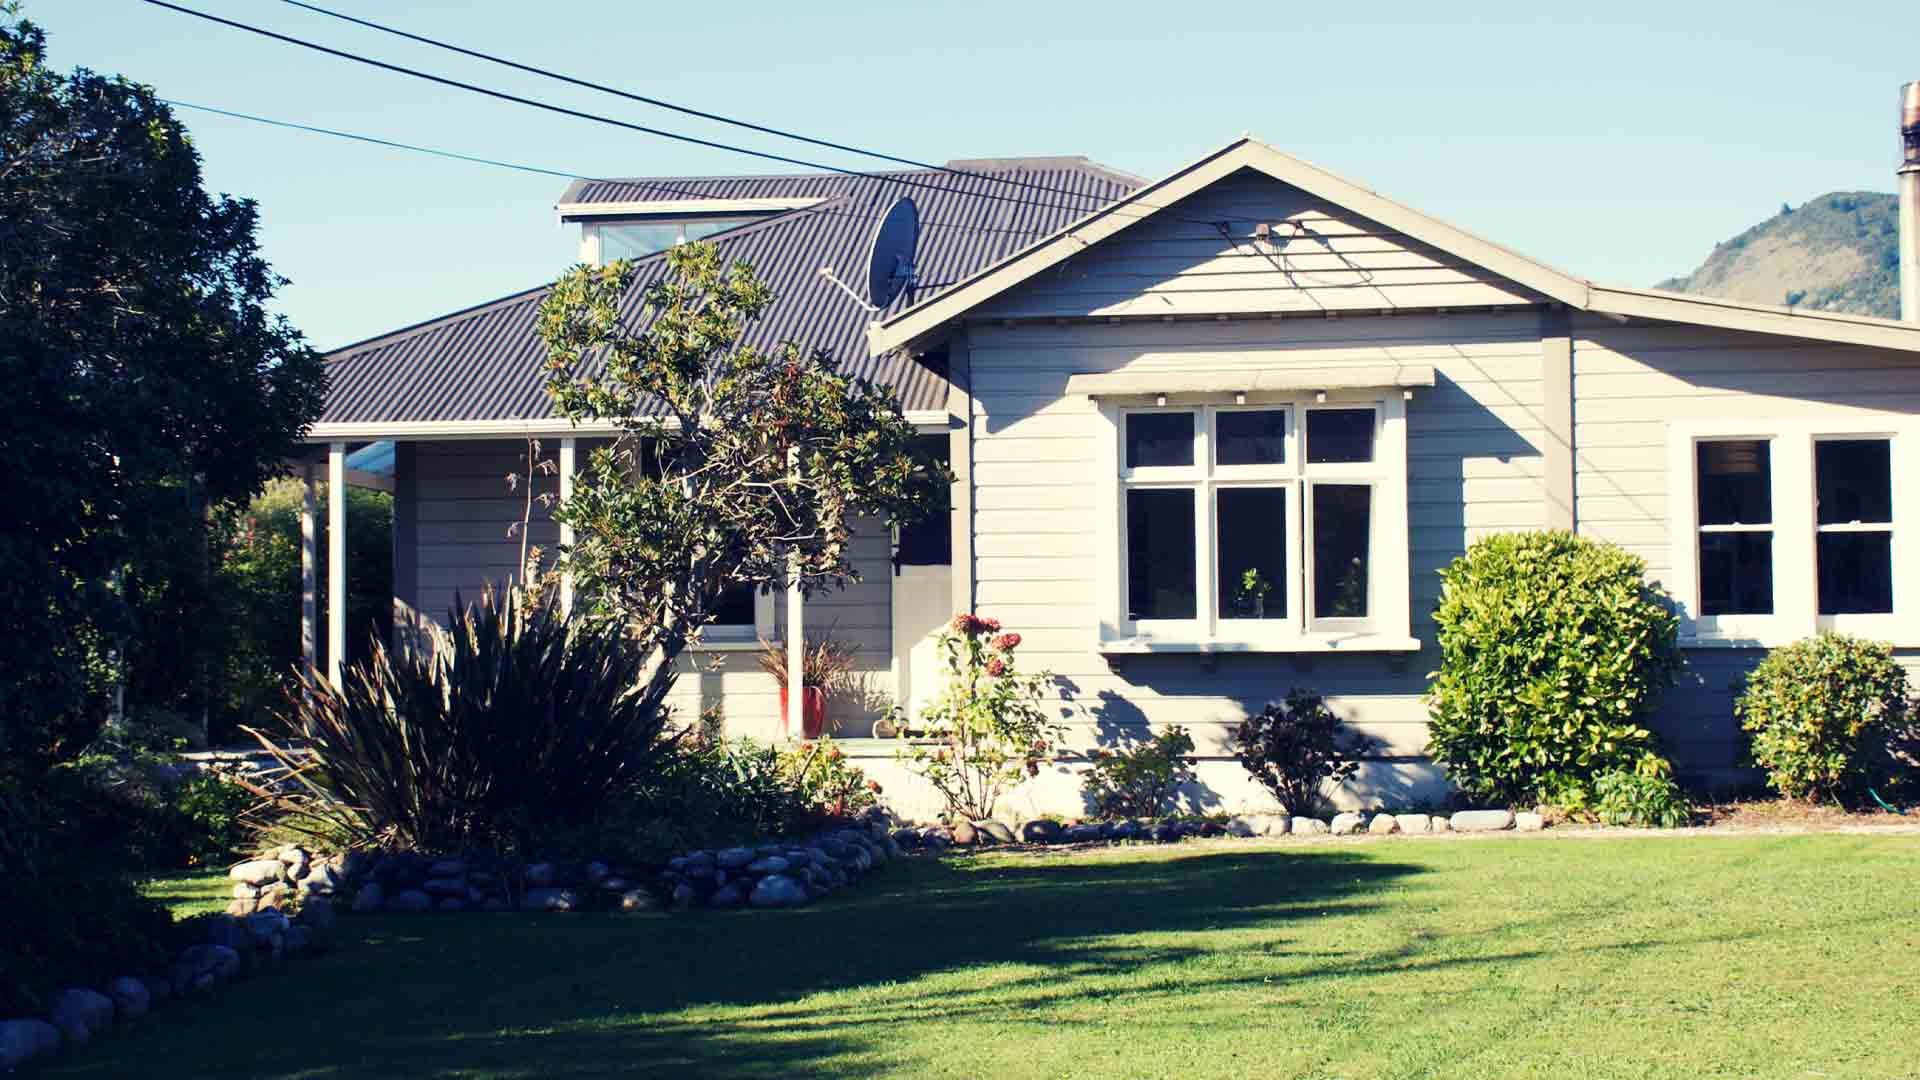 Exterior of a classic New Zealand bungalow.